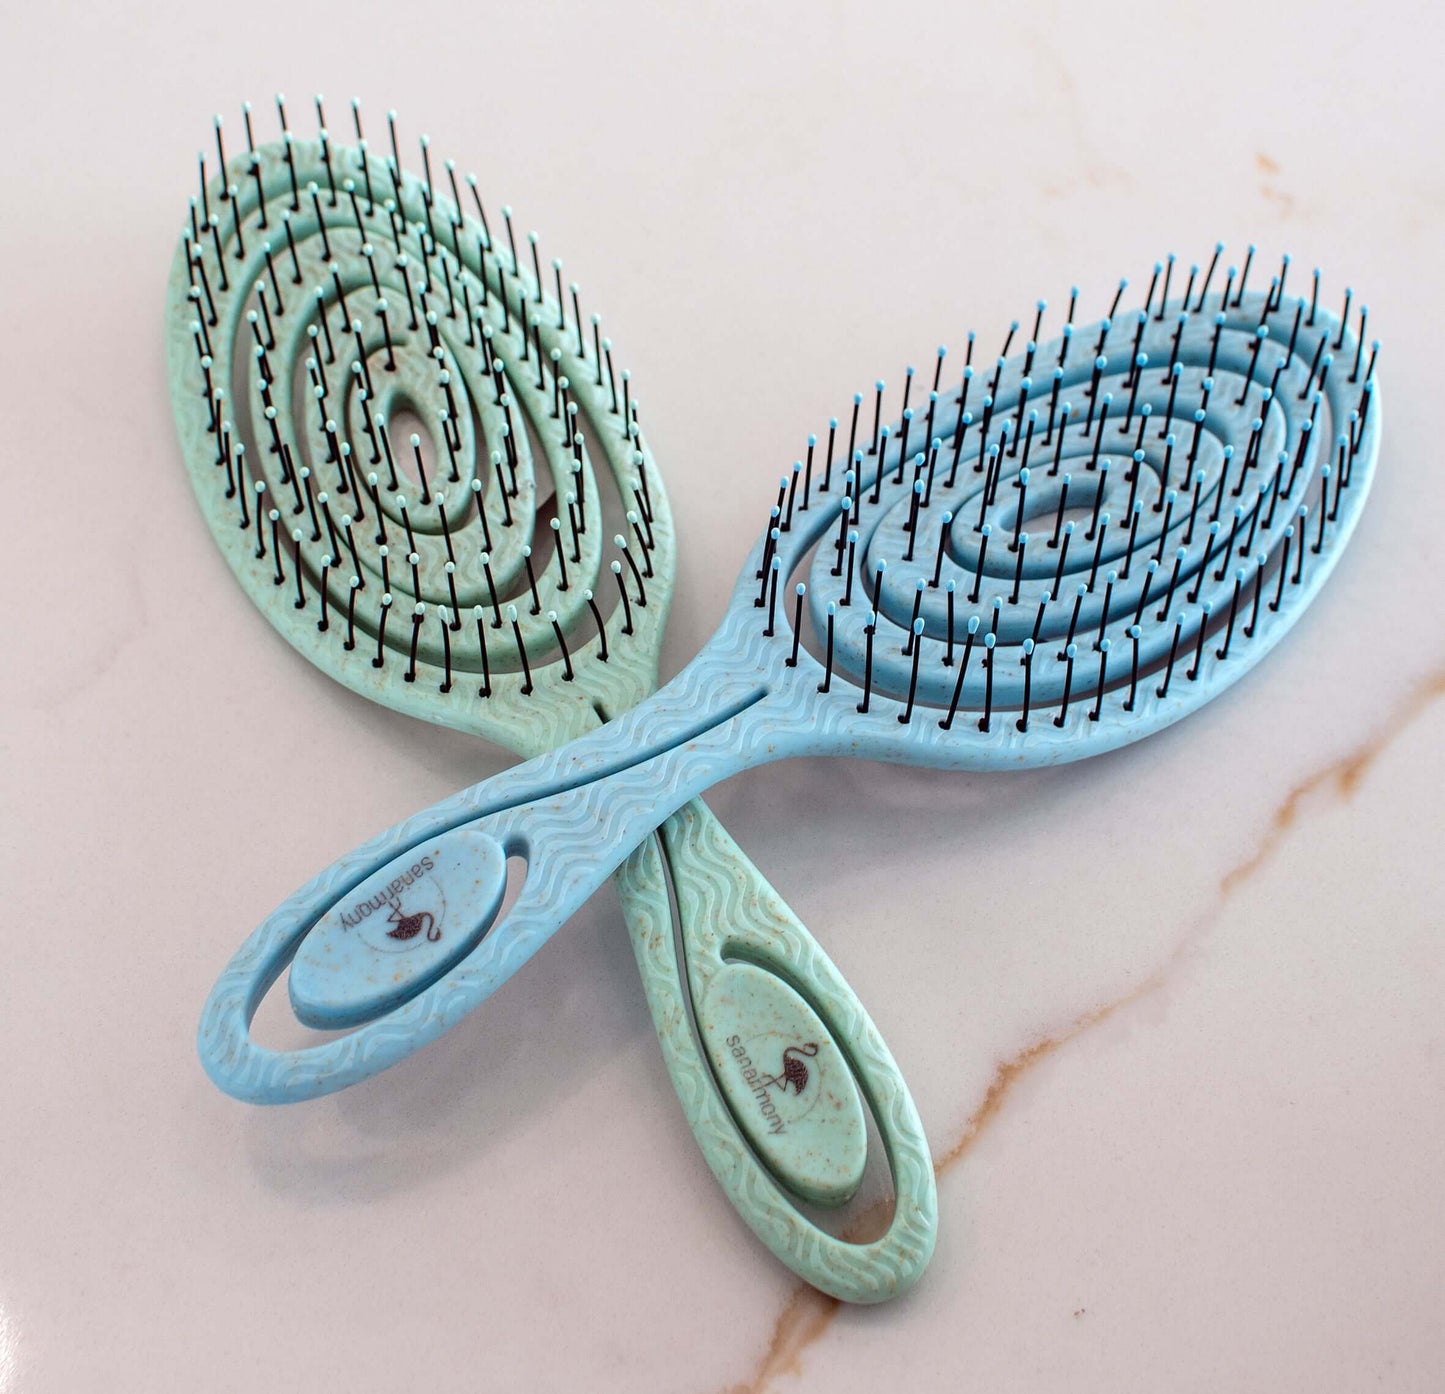 Ultimate Detangling Hair Brush for All Hair Types Effortlessly detangle any hair type with our brush - easy for thin, thick, wet, or dry hair. Gentle on hair, no pulling. Vegan & cruelty-free.